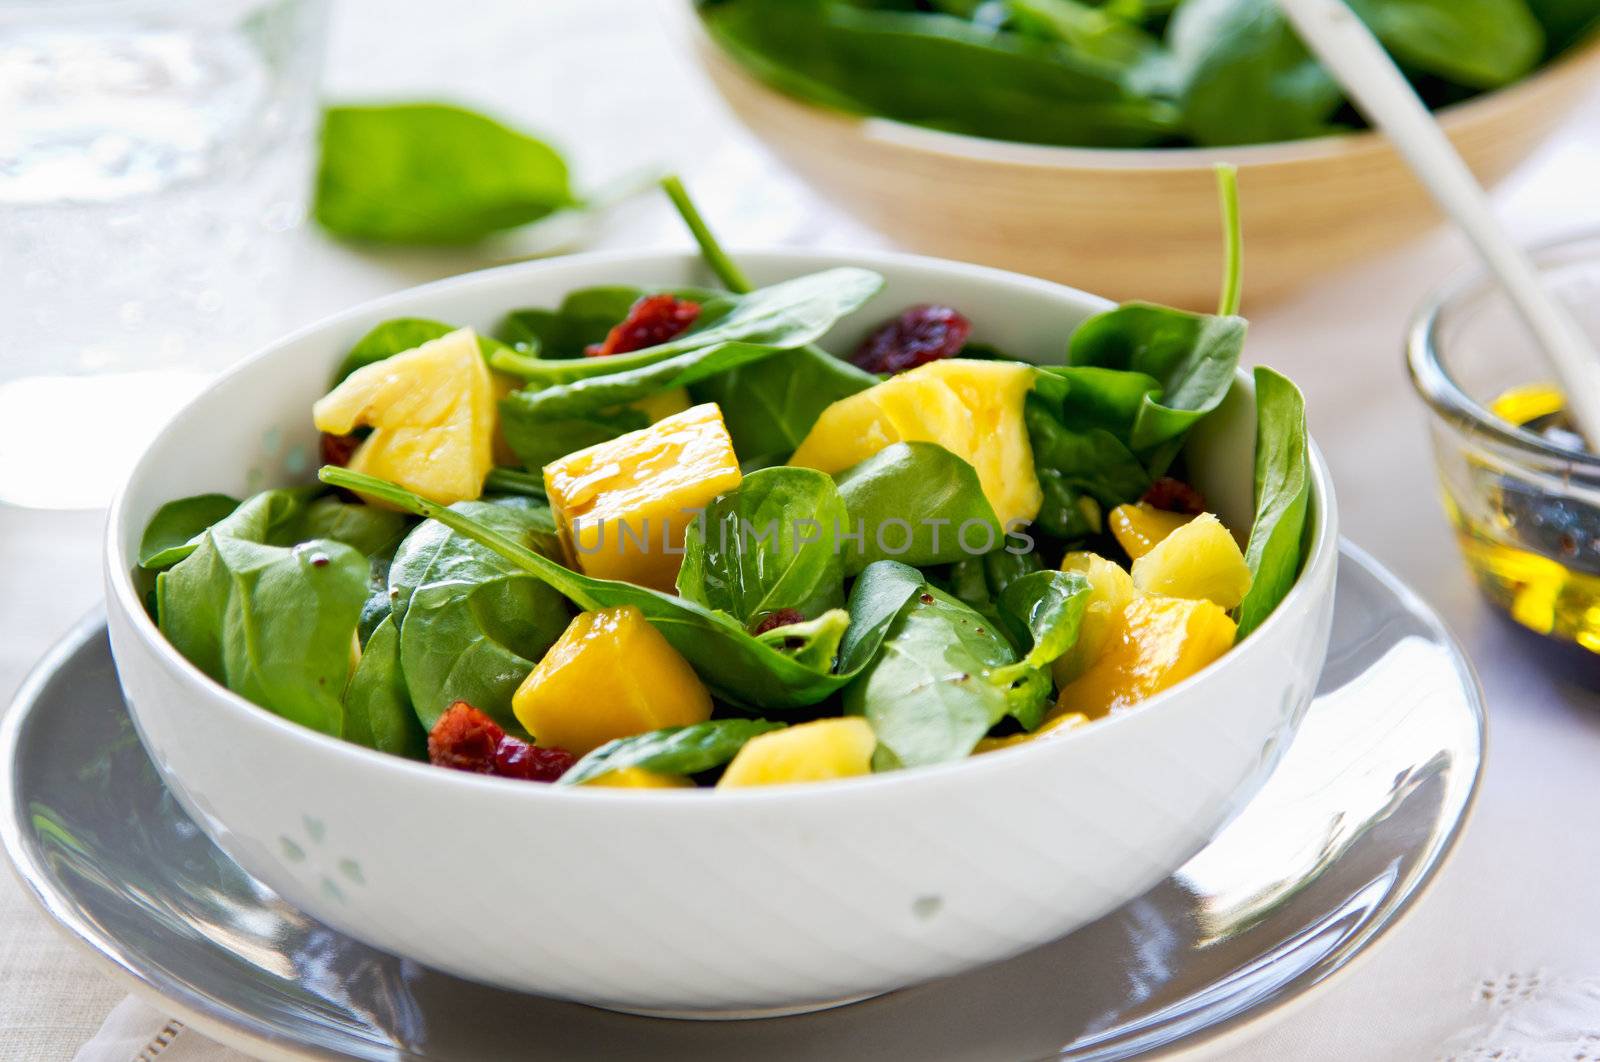 Mango and Pineapple with Spinach and dried cranberries salad